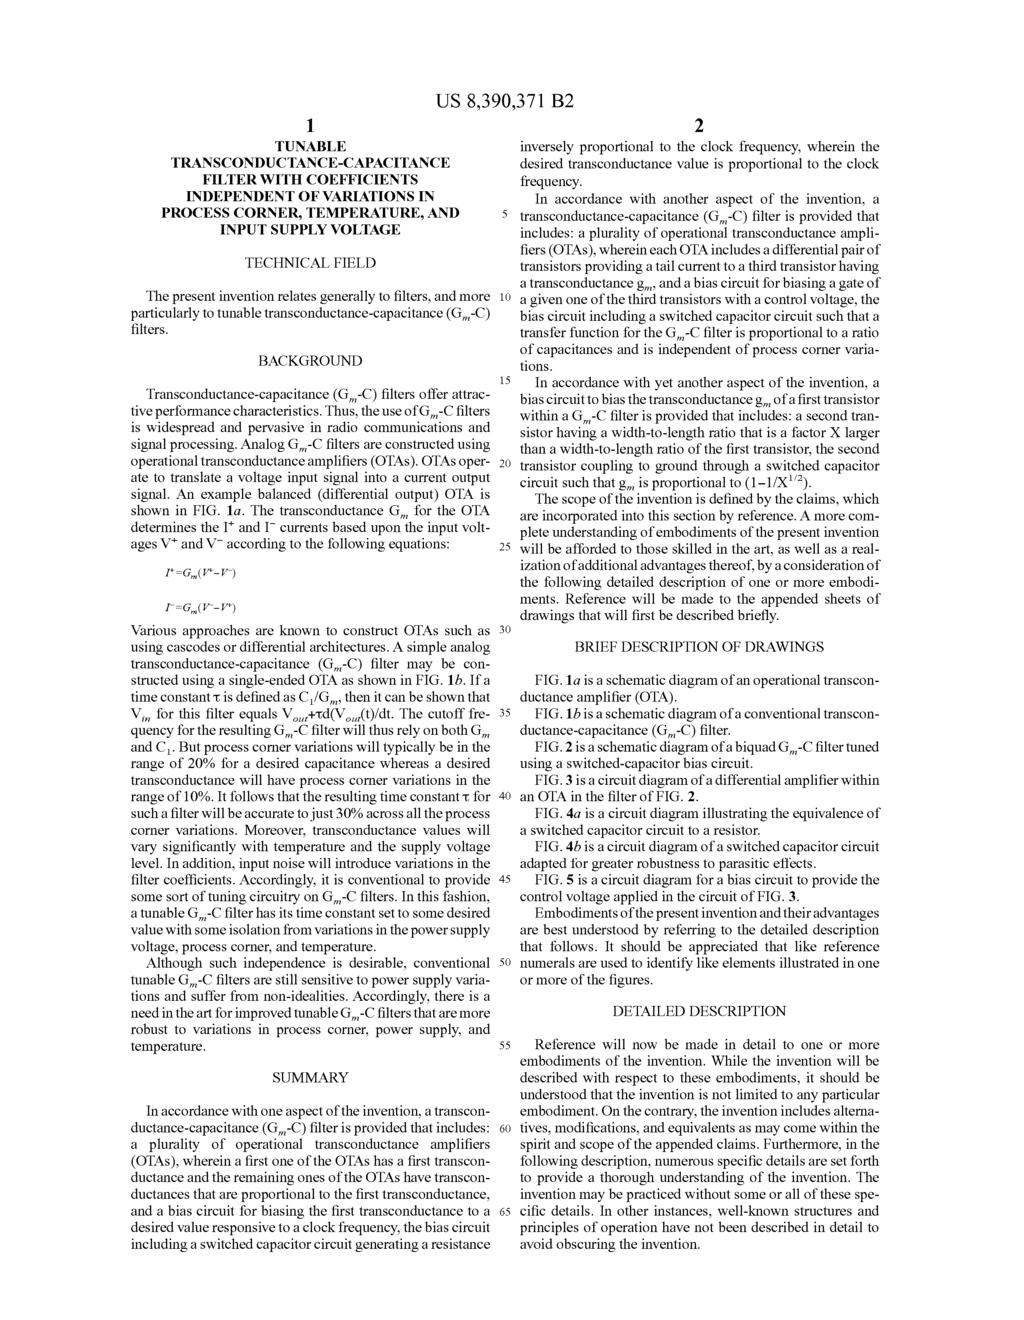 1 TUNABLE TRANSCONDUCTANCE-CAPACITANCE FILTER WITH COEFFICIENTS INDEPENDENT OF VARIATIONS IN PROCESS CORNER, TEMPERATURE, AND INPUT SUPPLY VOLTAGE TECHNICAL FIELD The present invention relates